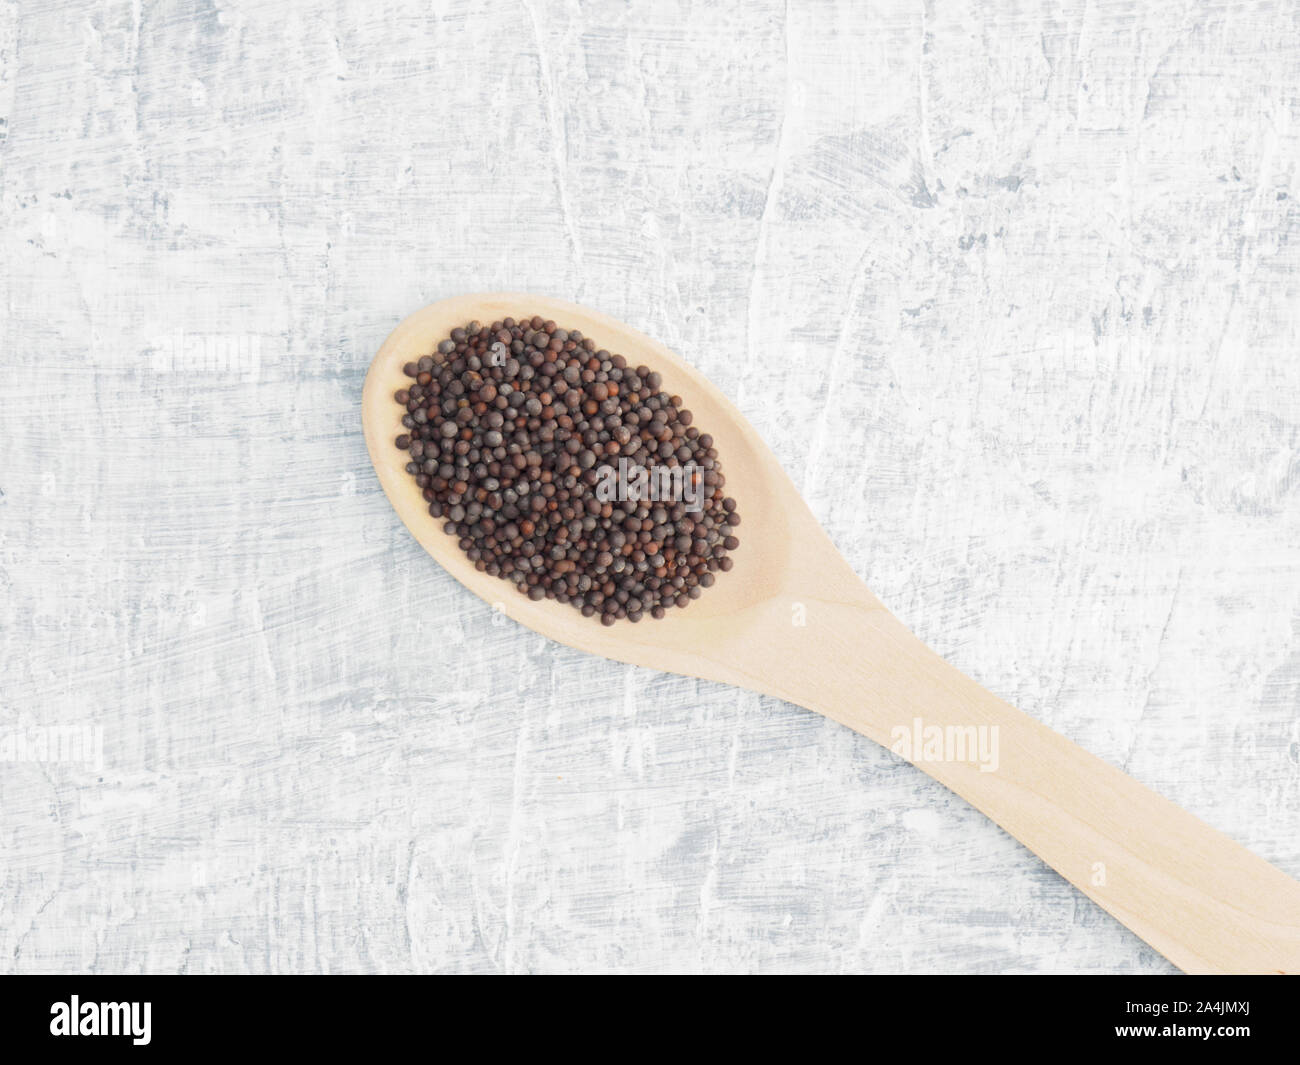 Spices and herbs help maintain good health and improve appetite, top view on white concrete background. Mustard seeds in wooden spoon. Modern apotheca Stock Photo